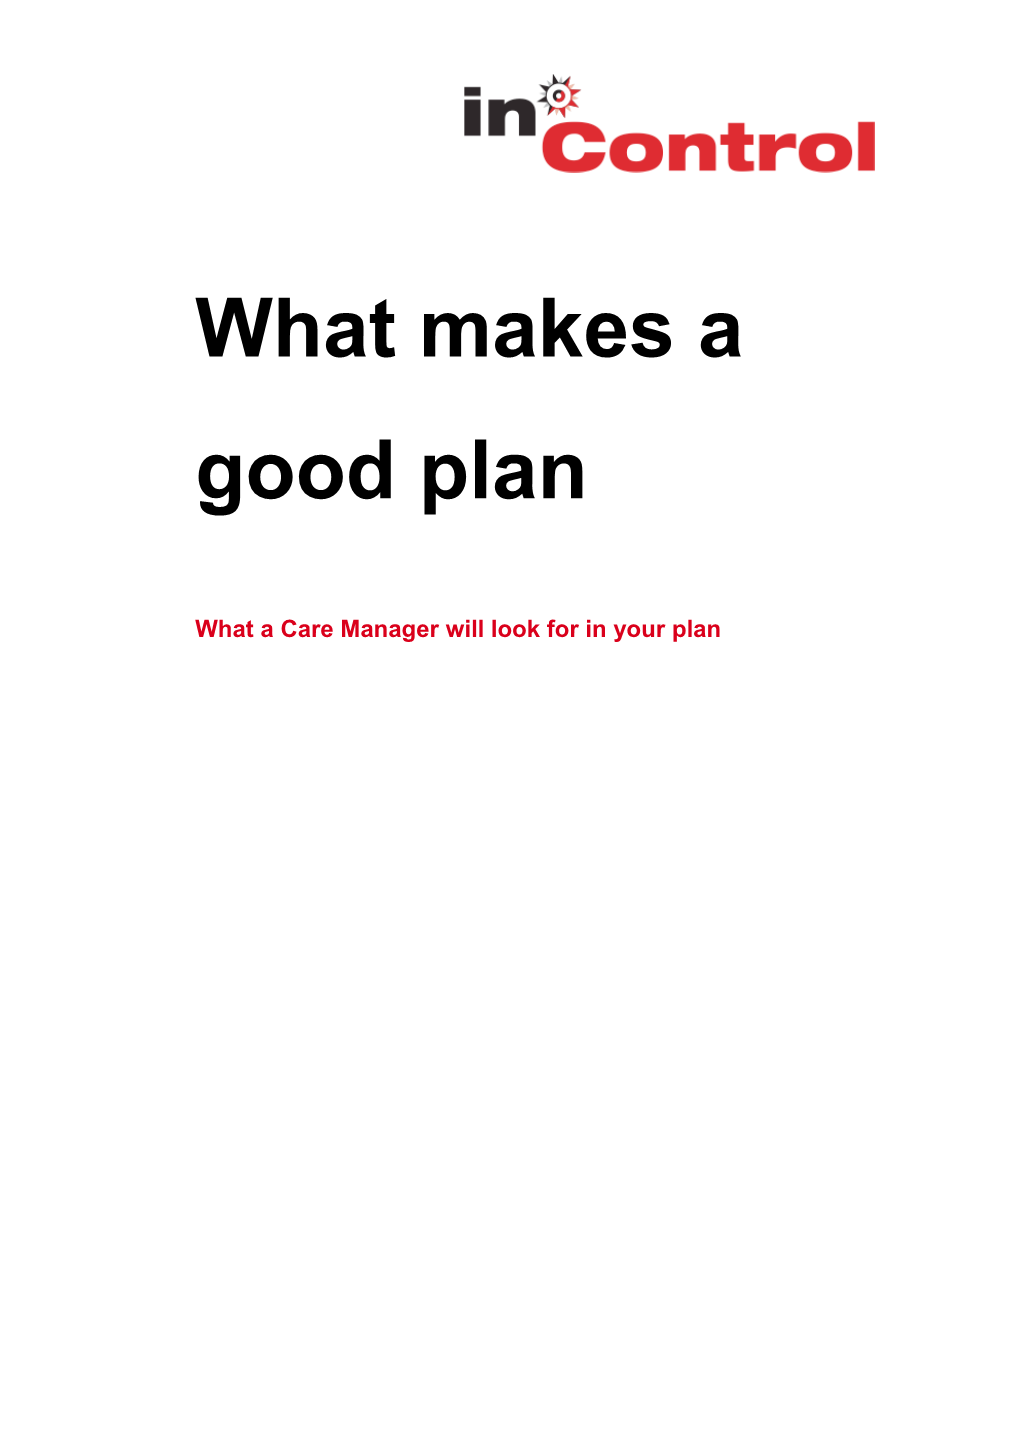 What a Care Manager Will Look for in Your Plan